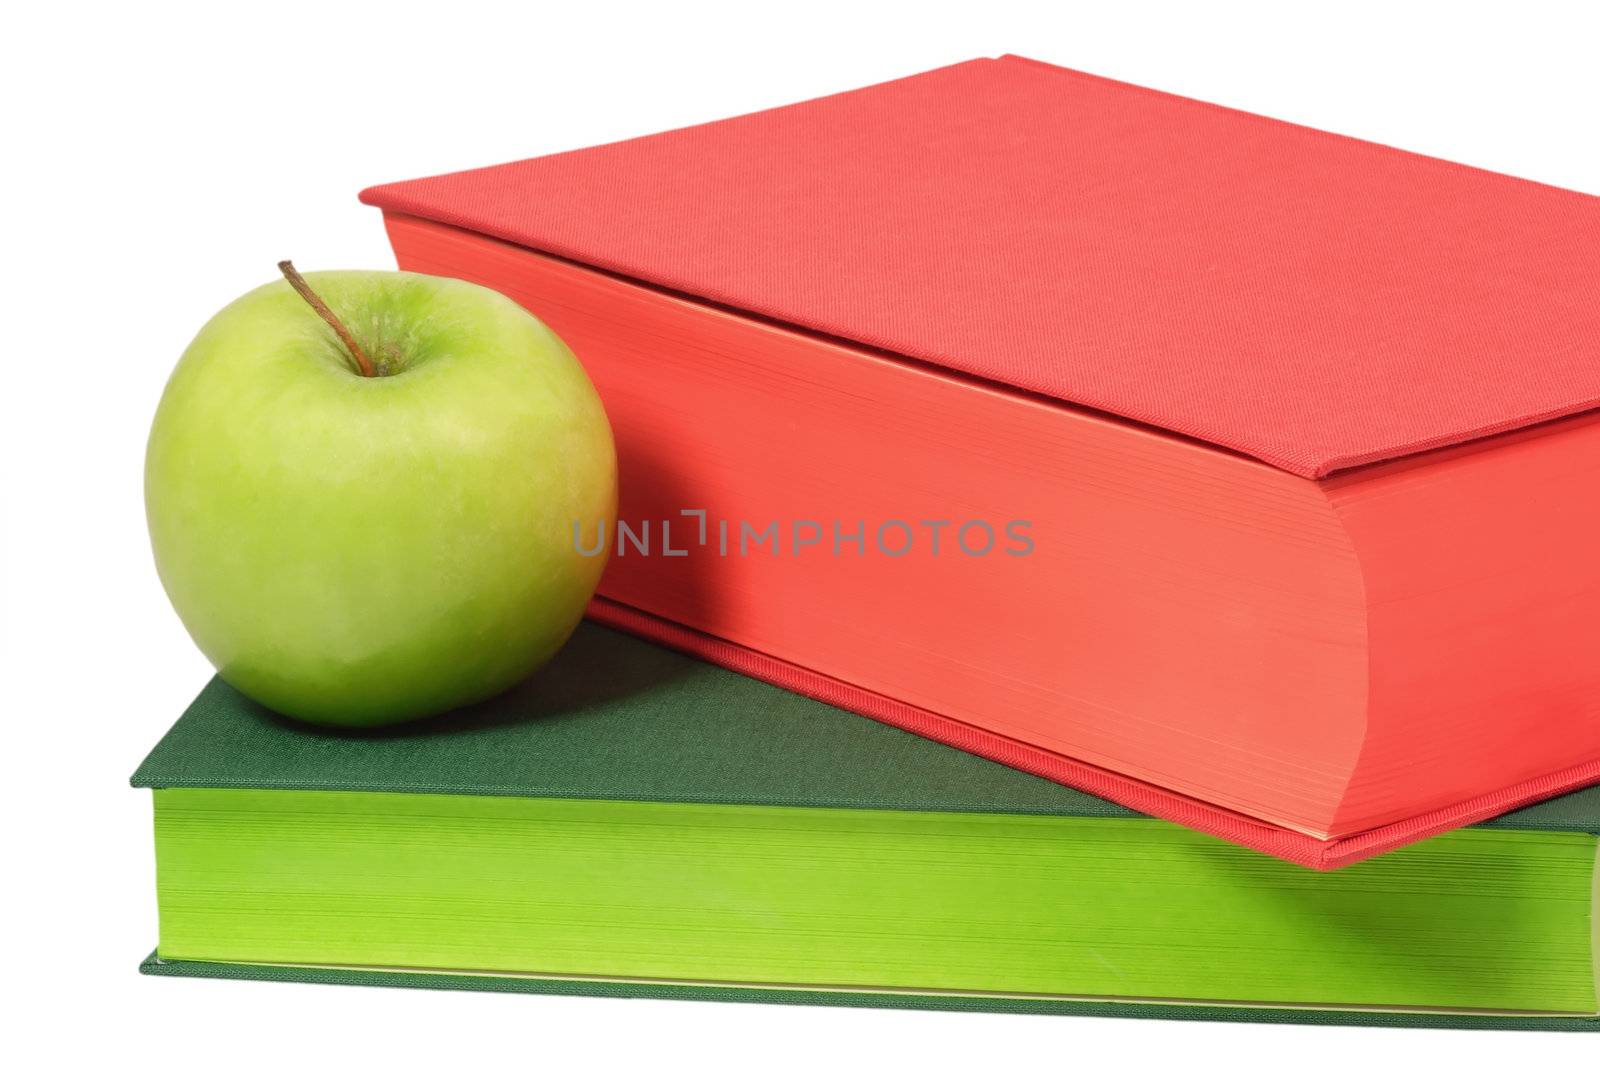 Books with green apple - isolated on white background